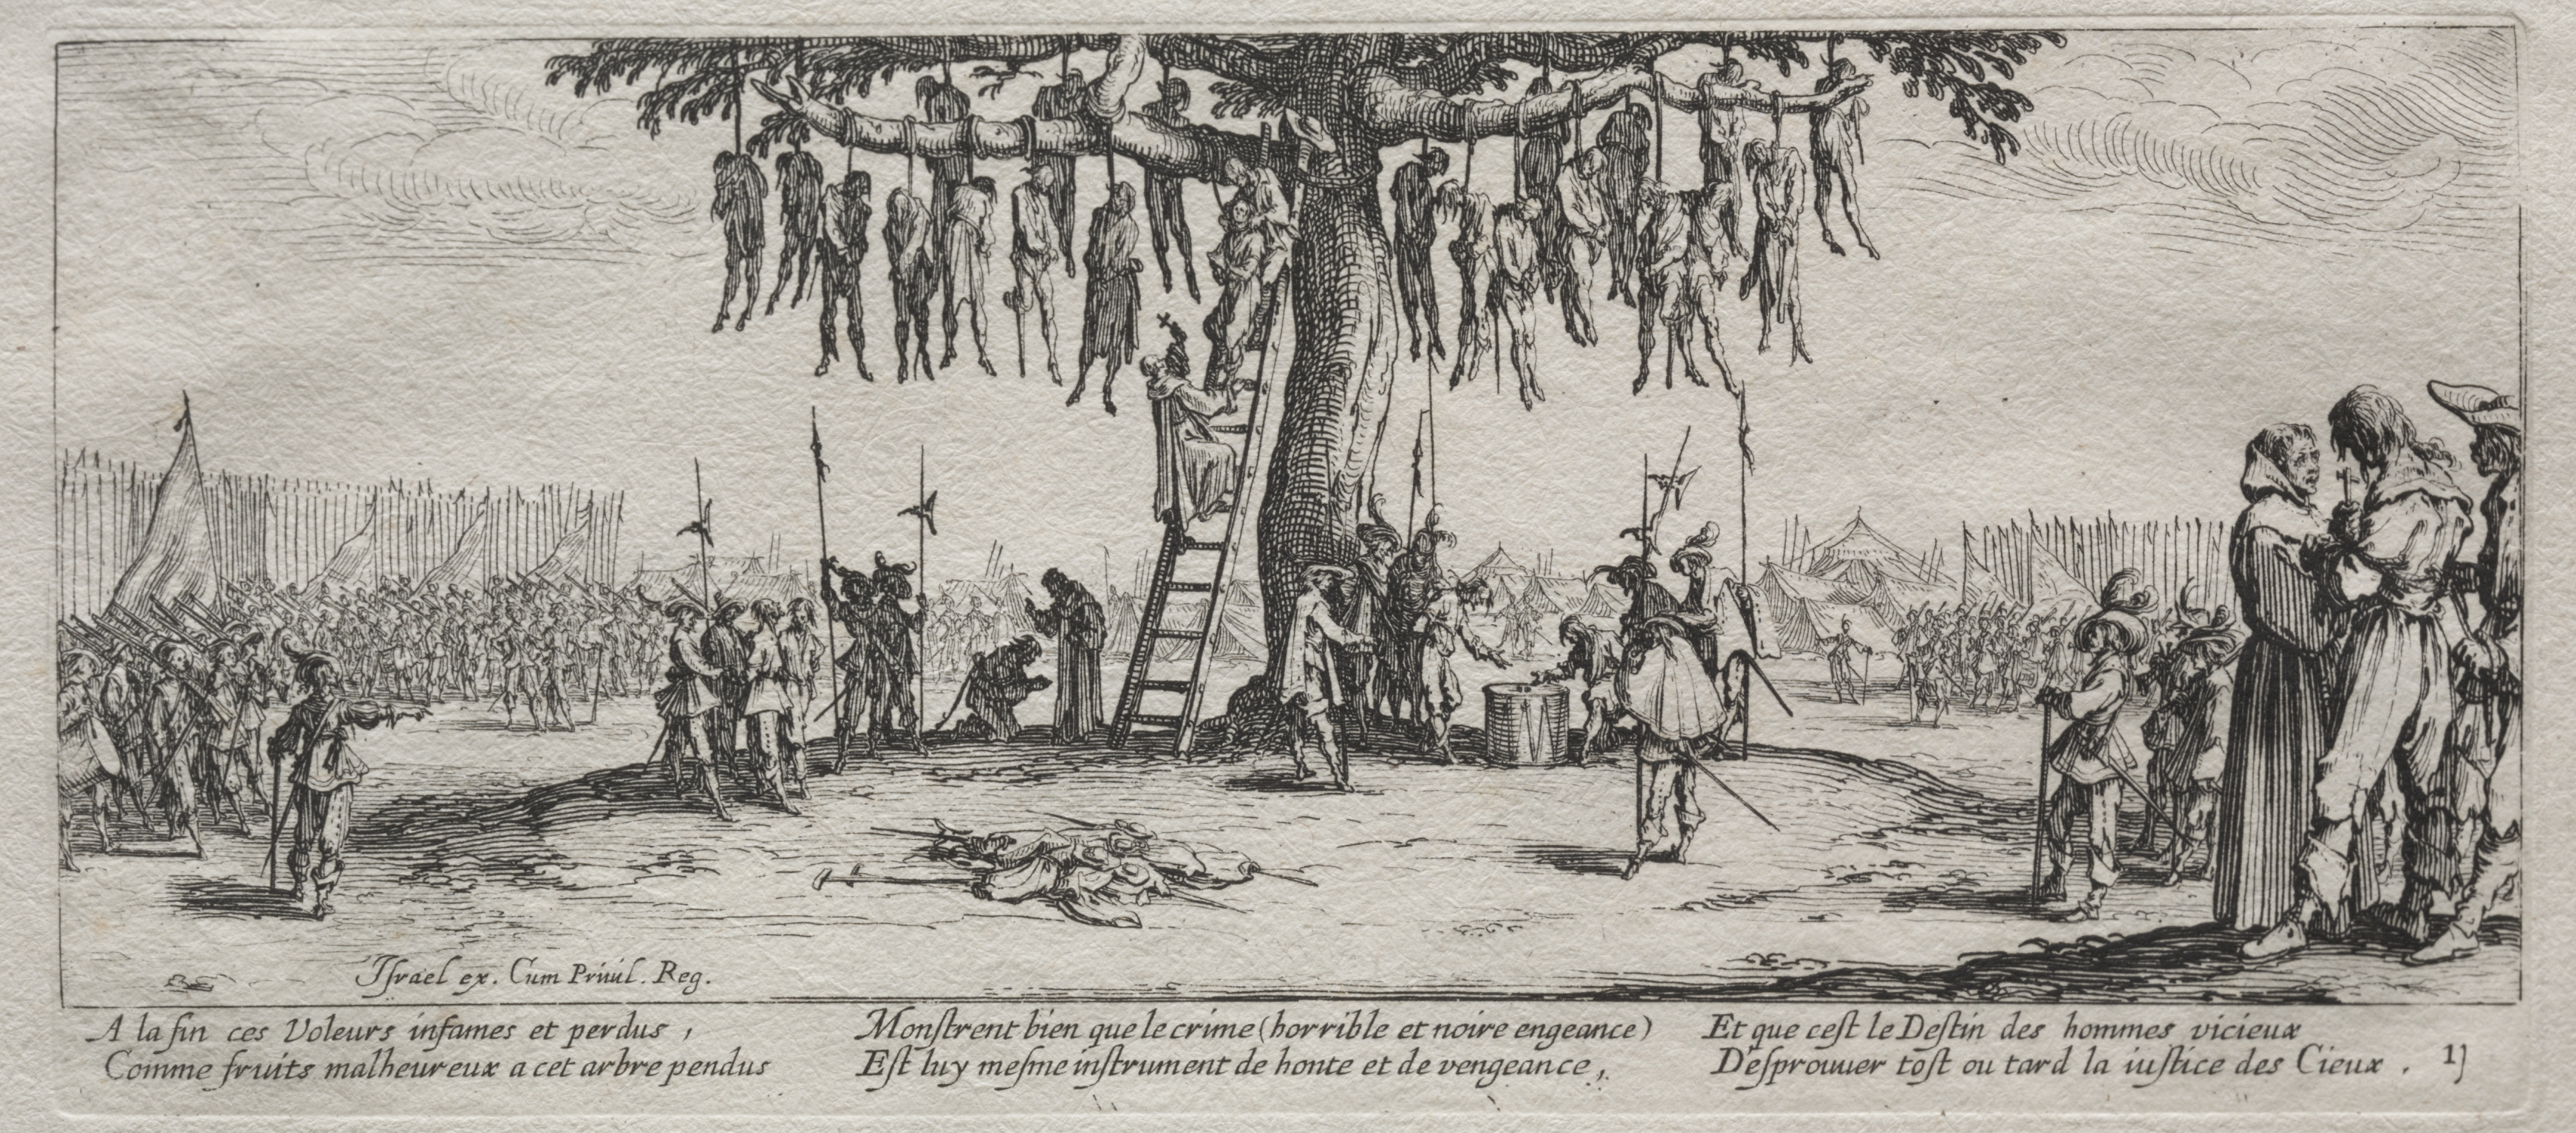 The Large Miseries of War:  The Hanging